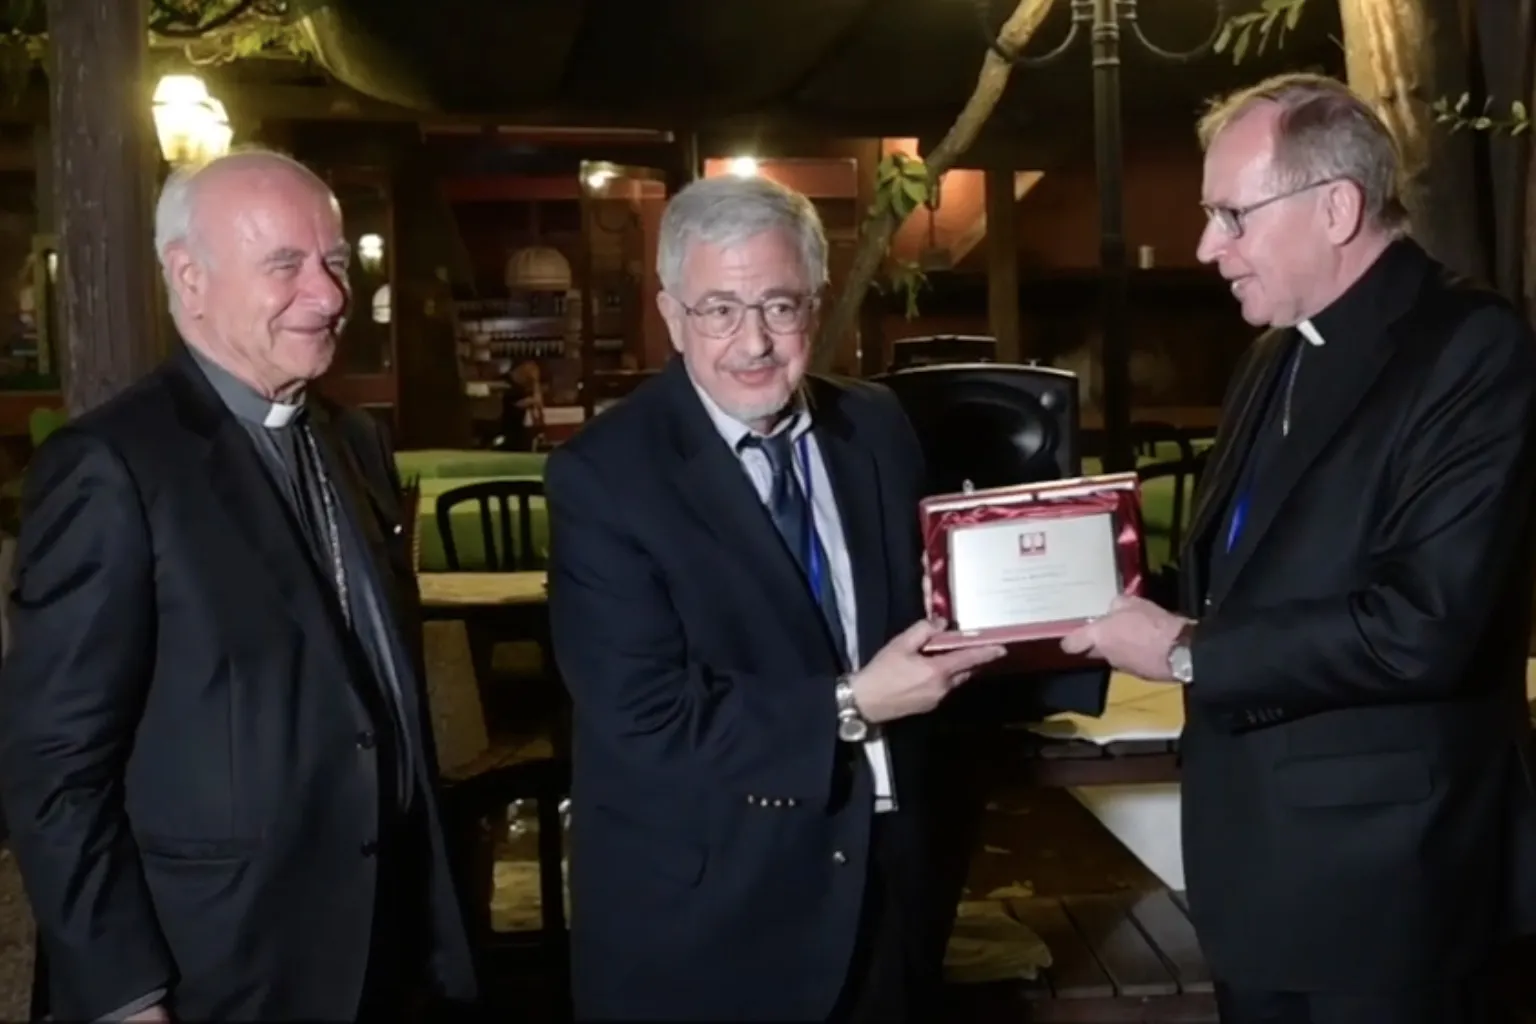 Dale Recinella (C) accepts the Pontifical Academy for Life's Guardian of Life Award from Archbishop Vincenzo Paglia (L) and Cardinal Wim Eijk (R), Sept. 28, 2021.?w=200&h=150